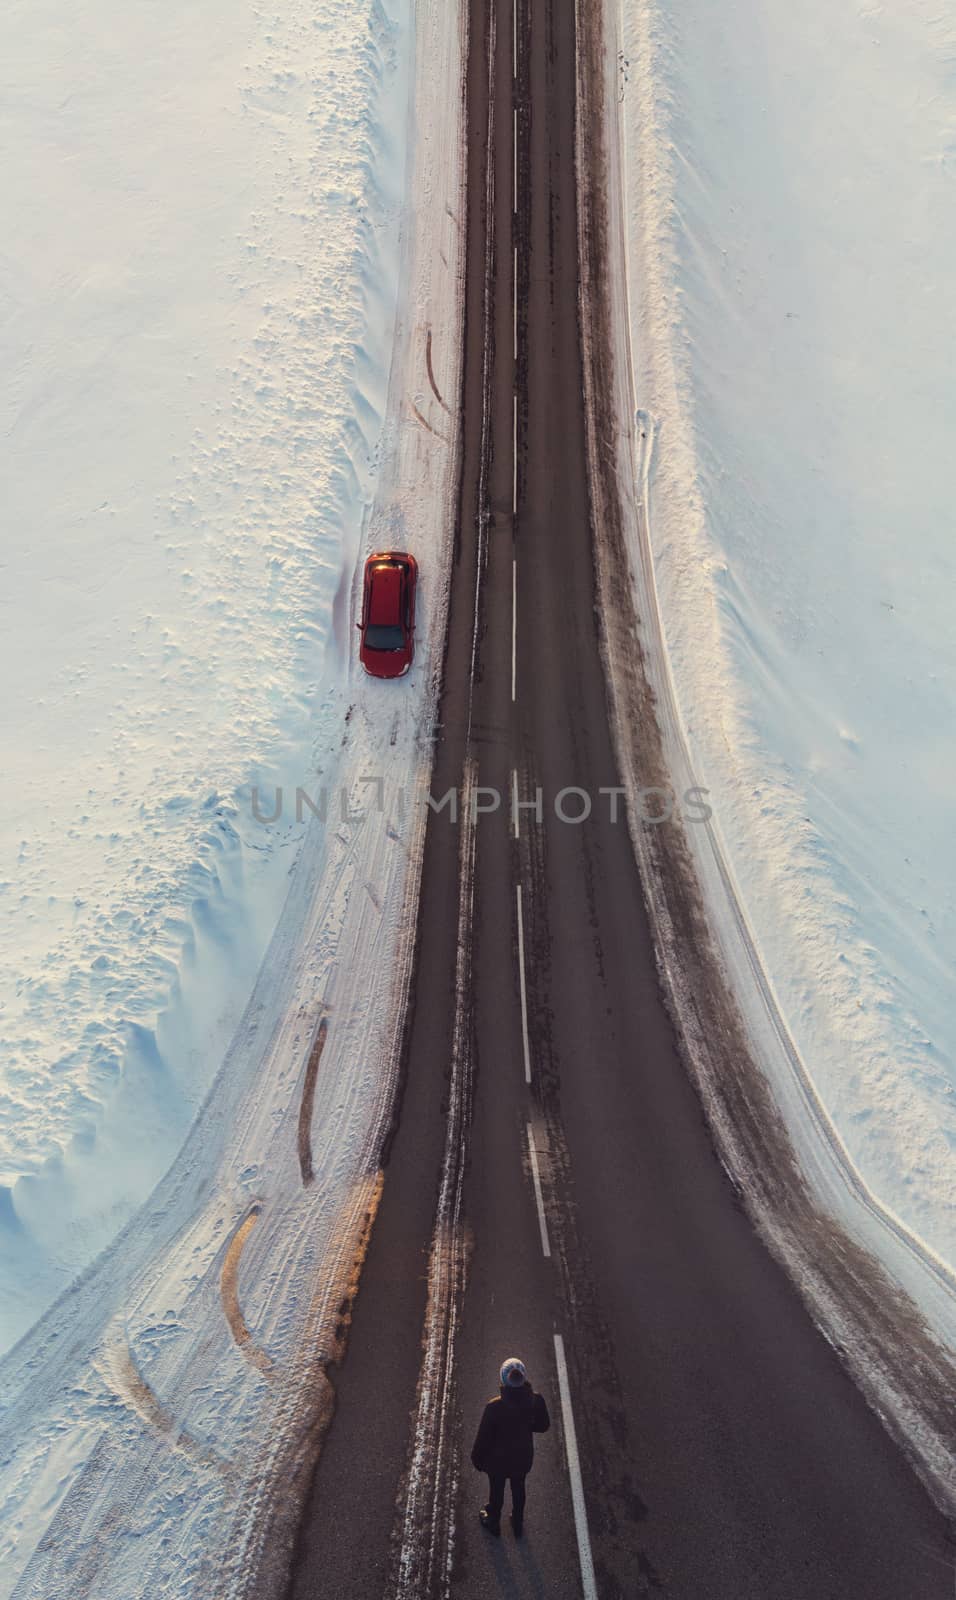 Surreal image with an unusual perspective with a woman on a winter road and car, simultaneous top view and normal view